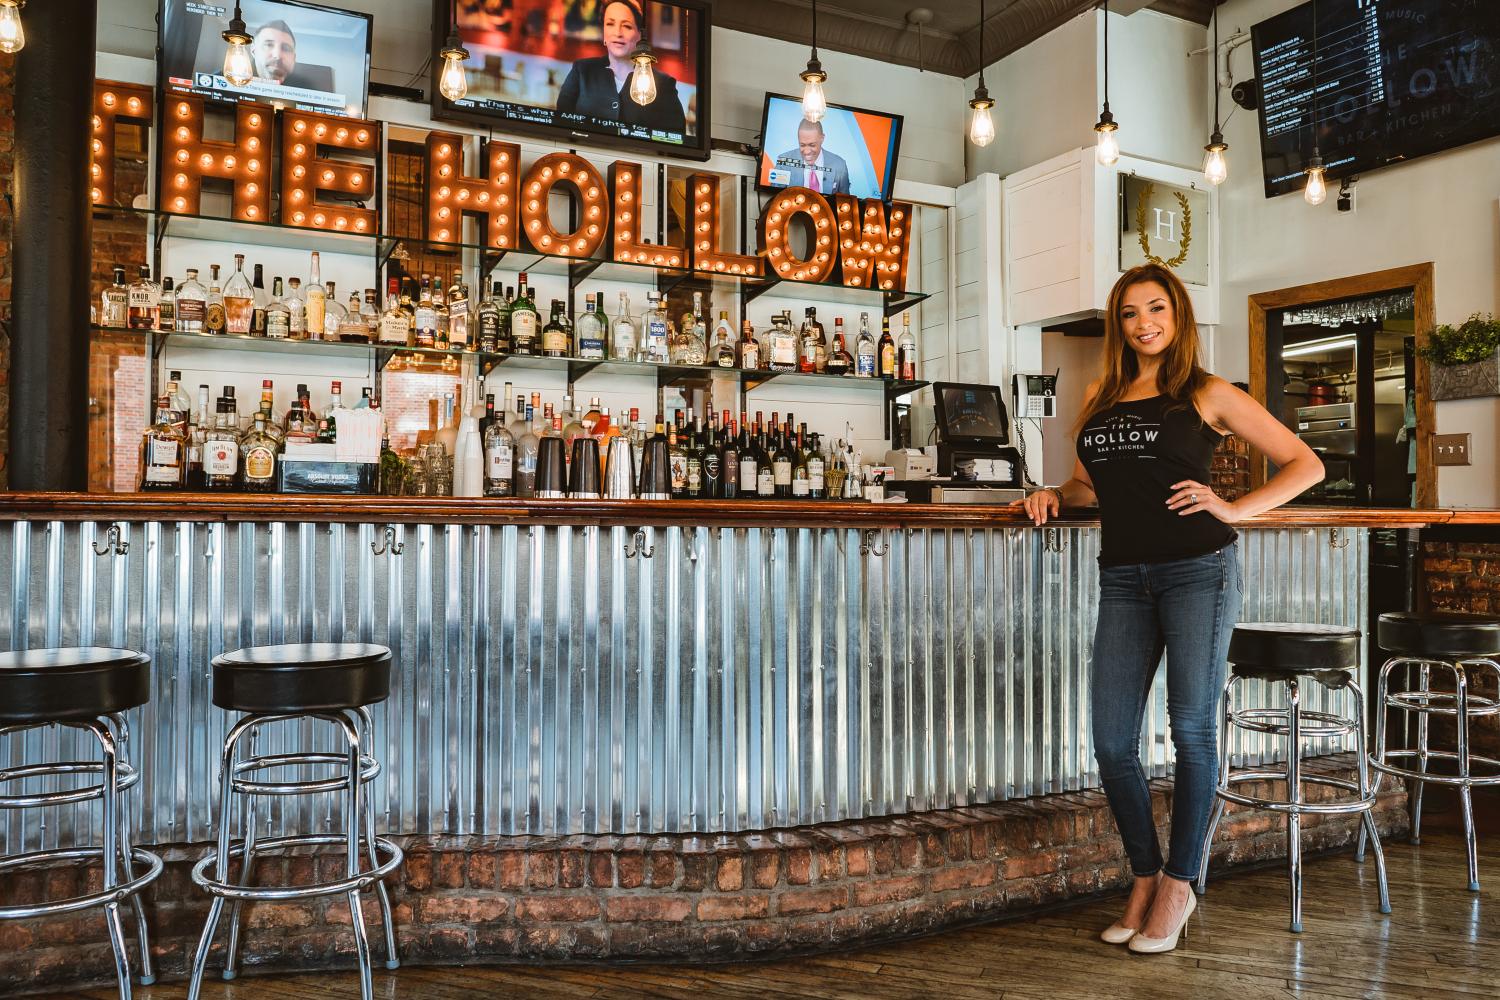 interior bar view of The Hollow